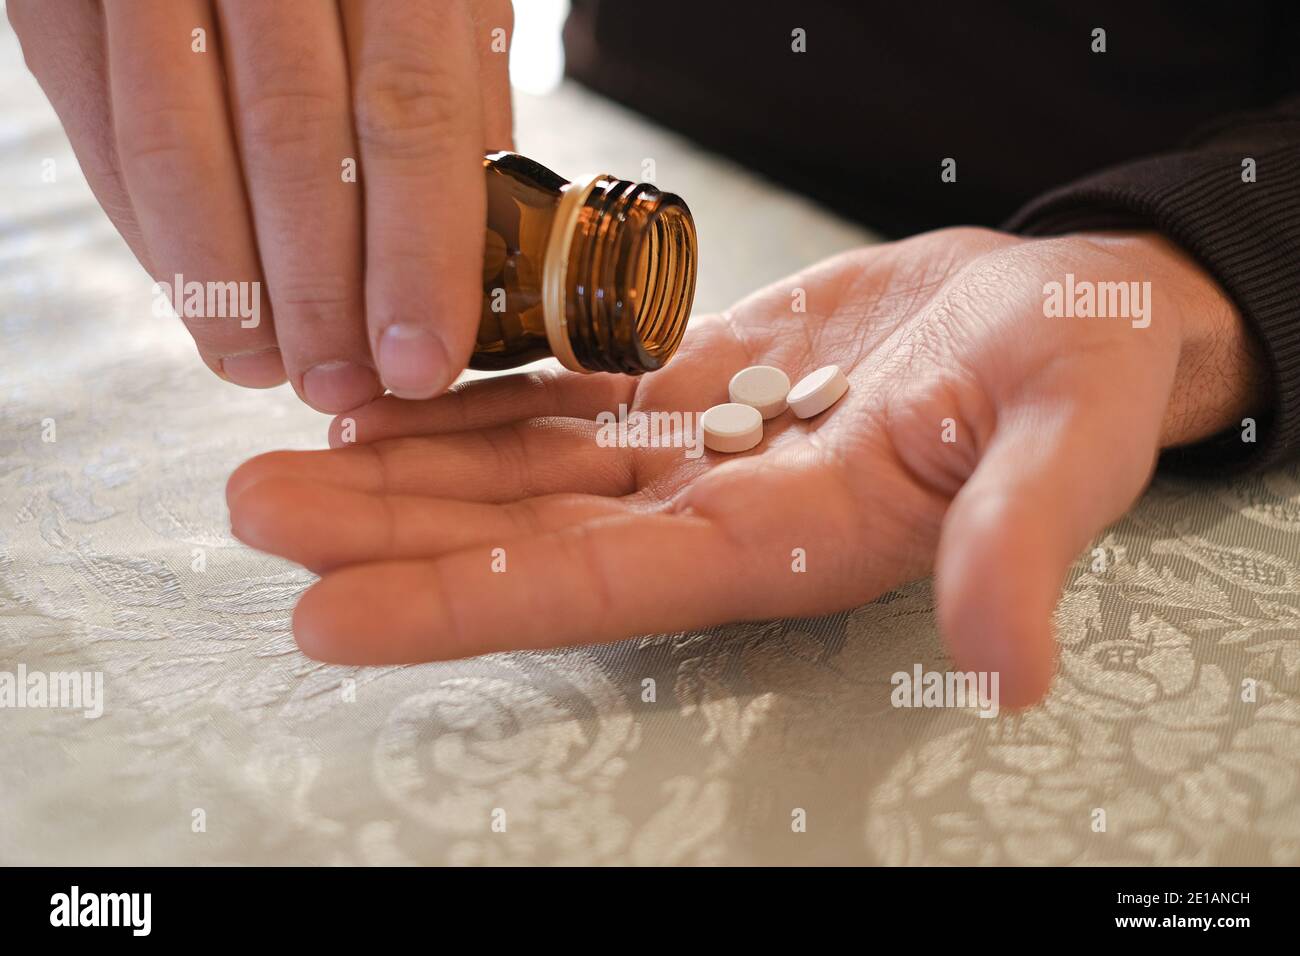 Man taking medicine pills for daily illness home treatment,healthy lifestyle Stock Photo